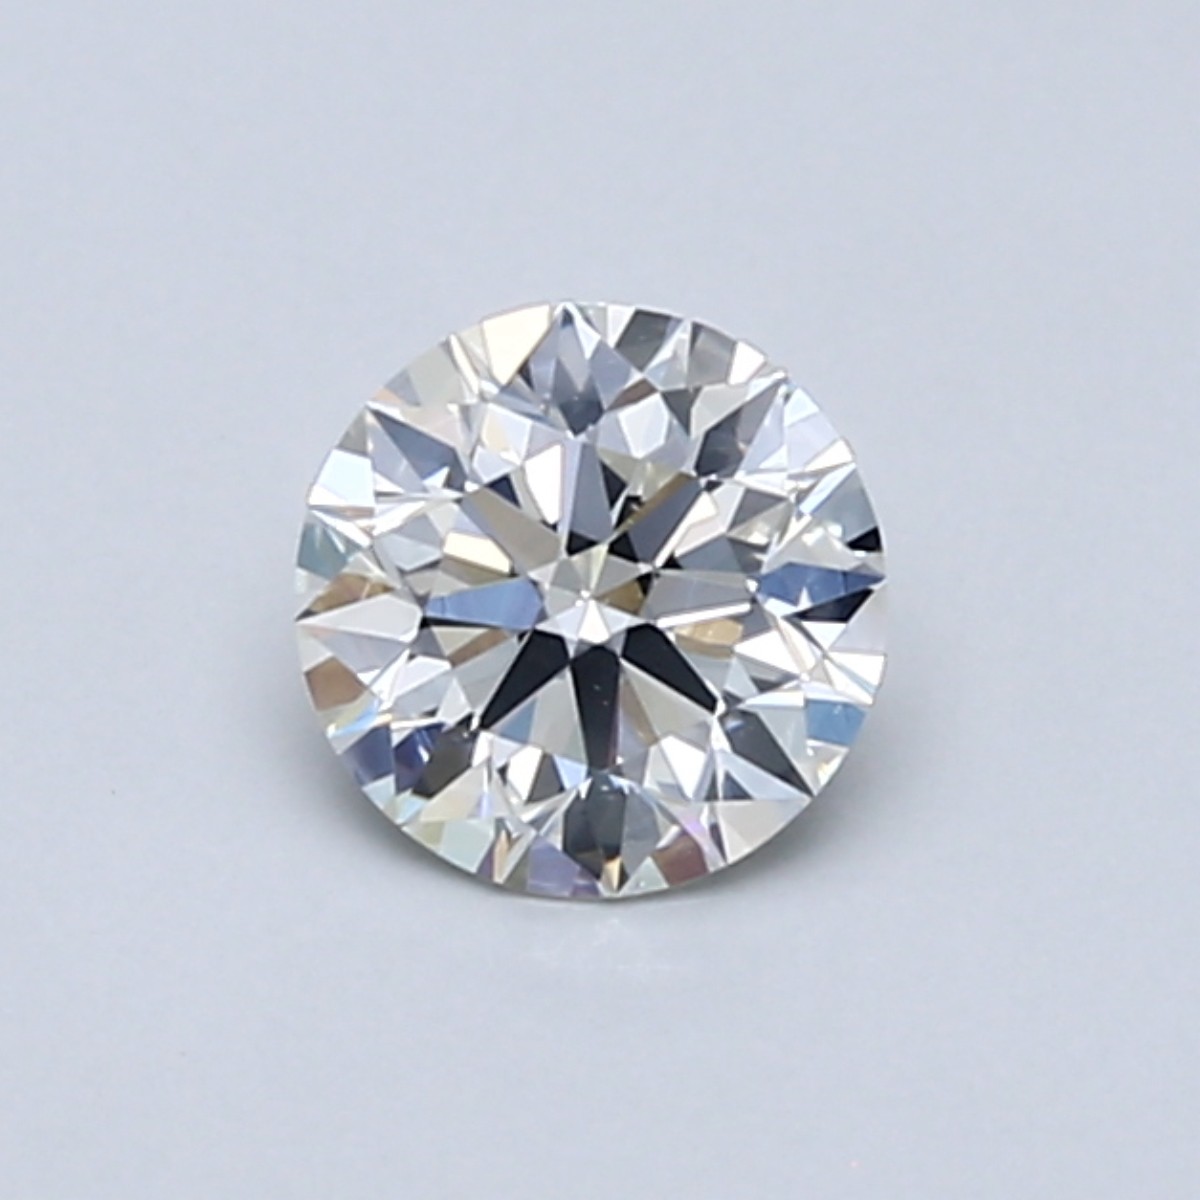 Round 0.57 Carat I Color SI1 Clarity For Sale